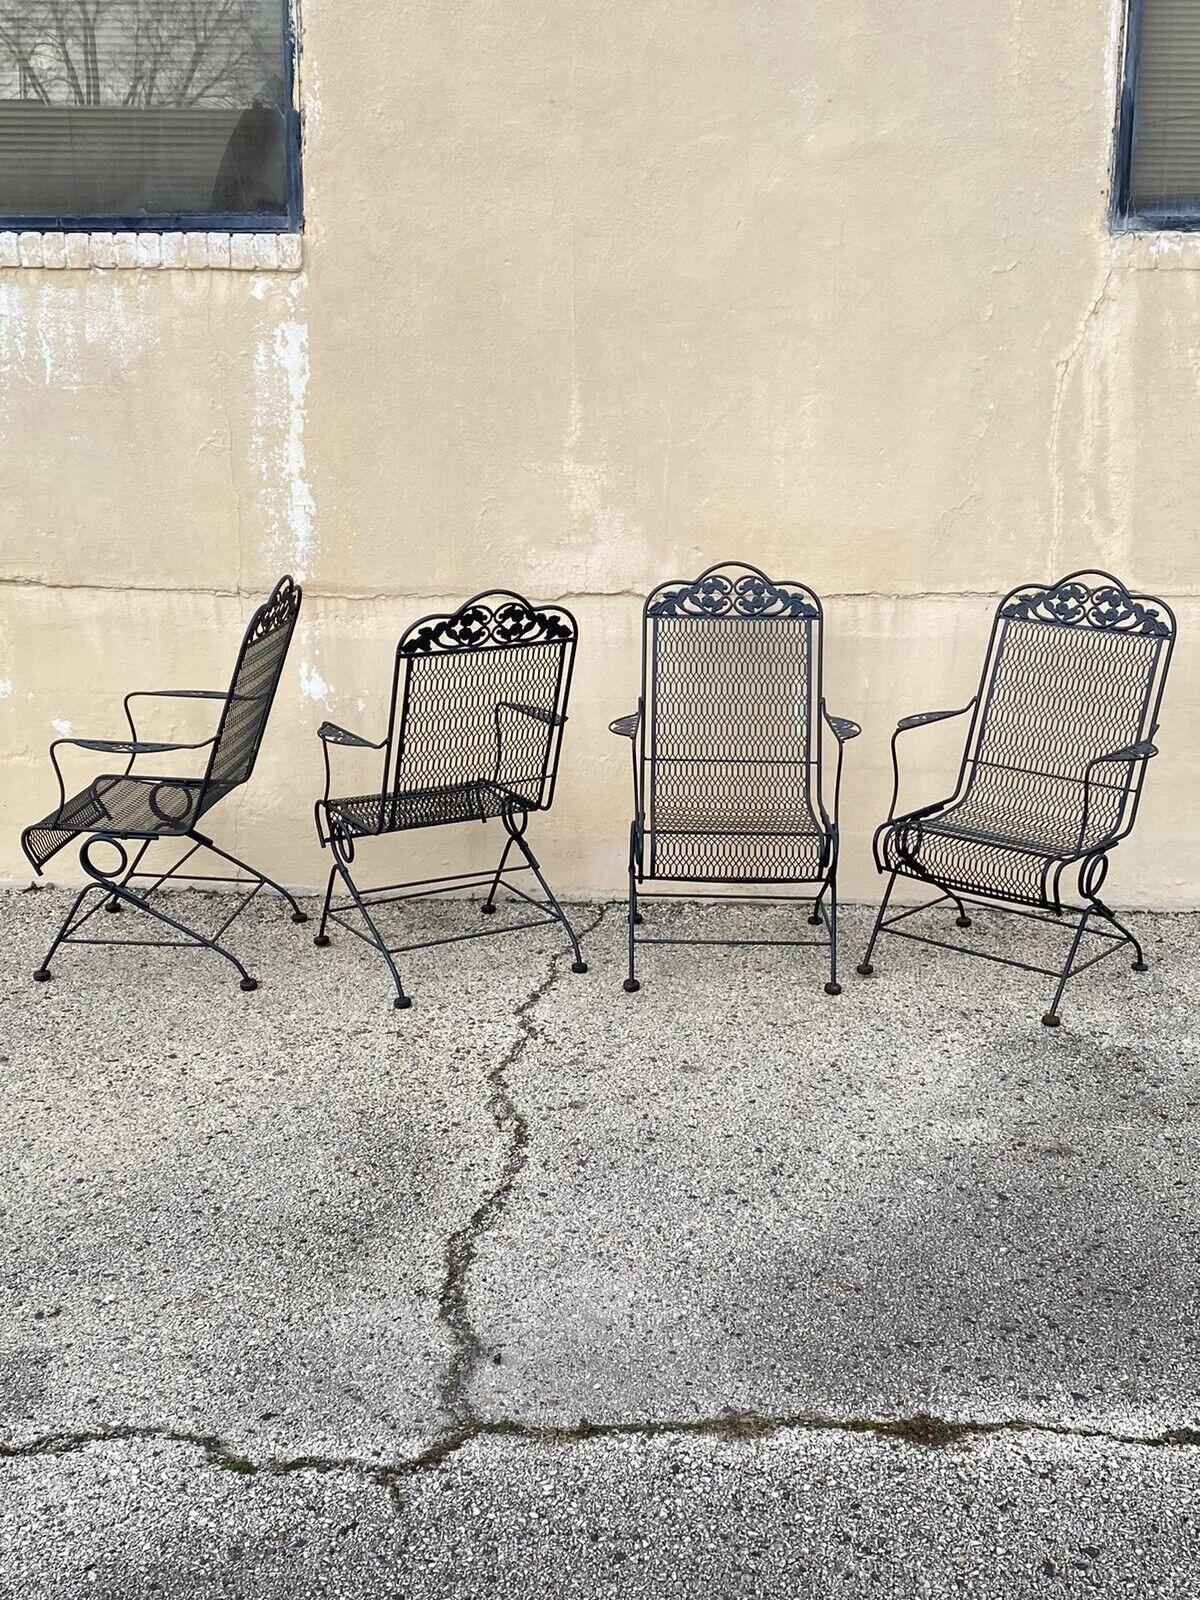 Vintage Wrought Iron Rose and Vine Pattern Garden Patio Chairs - 7 Pc Set For Sale 6